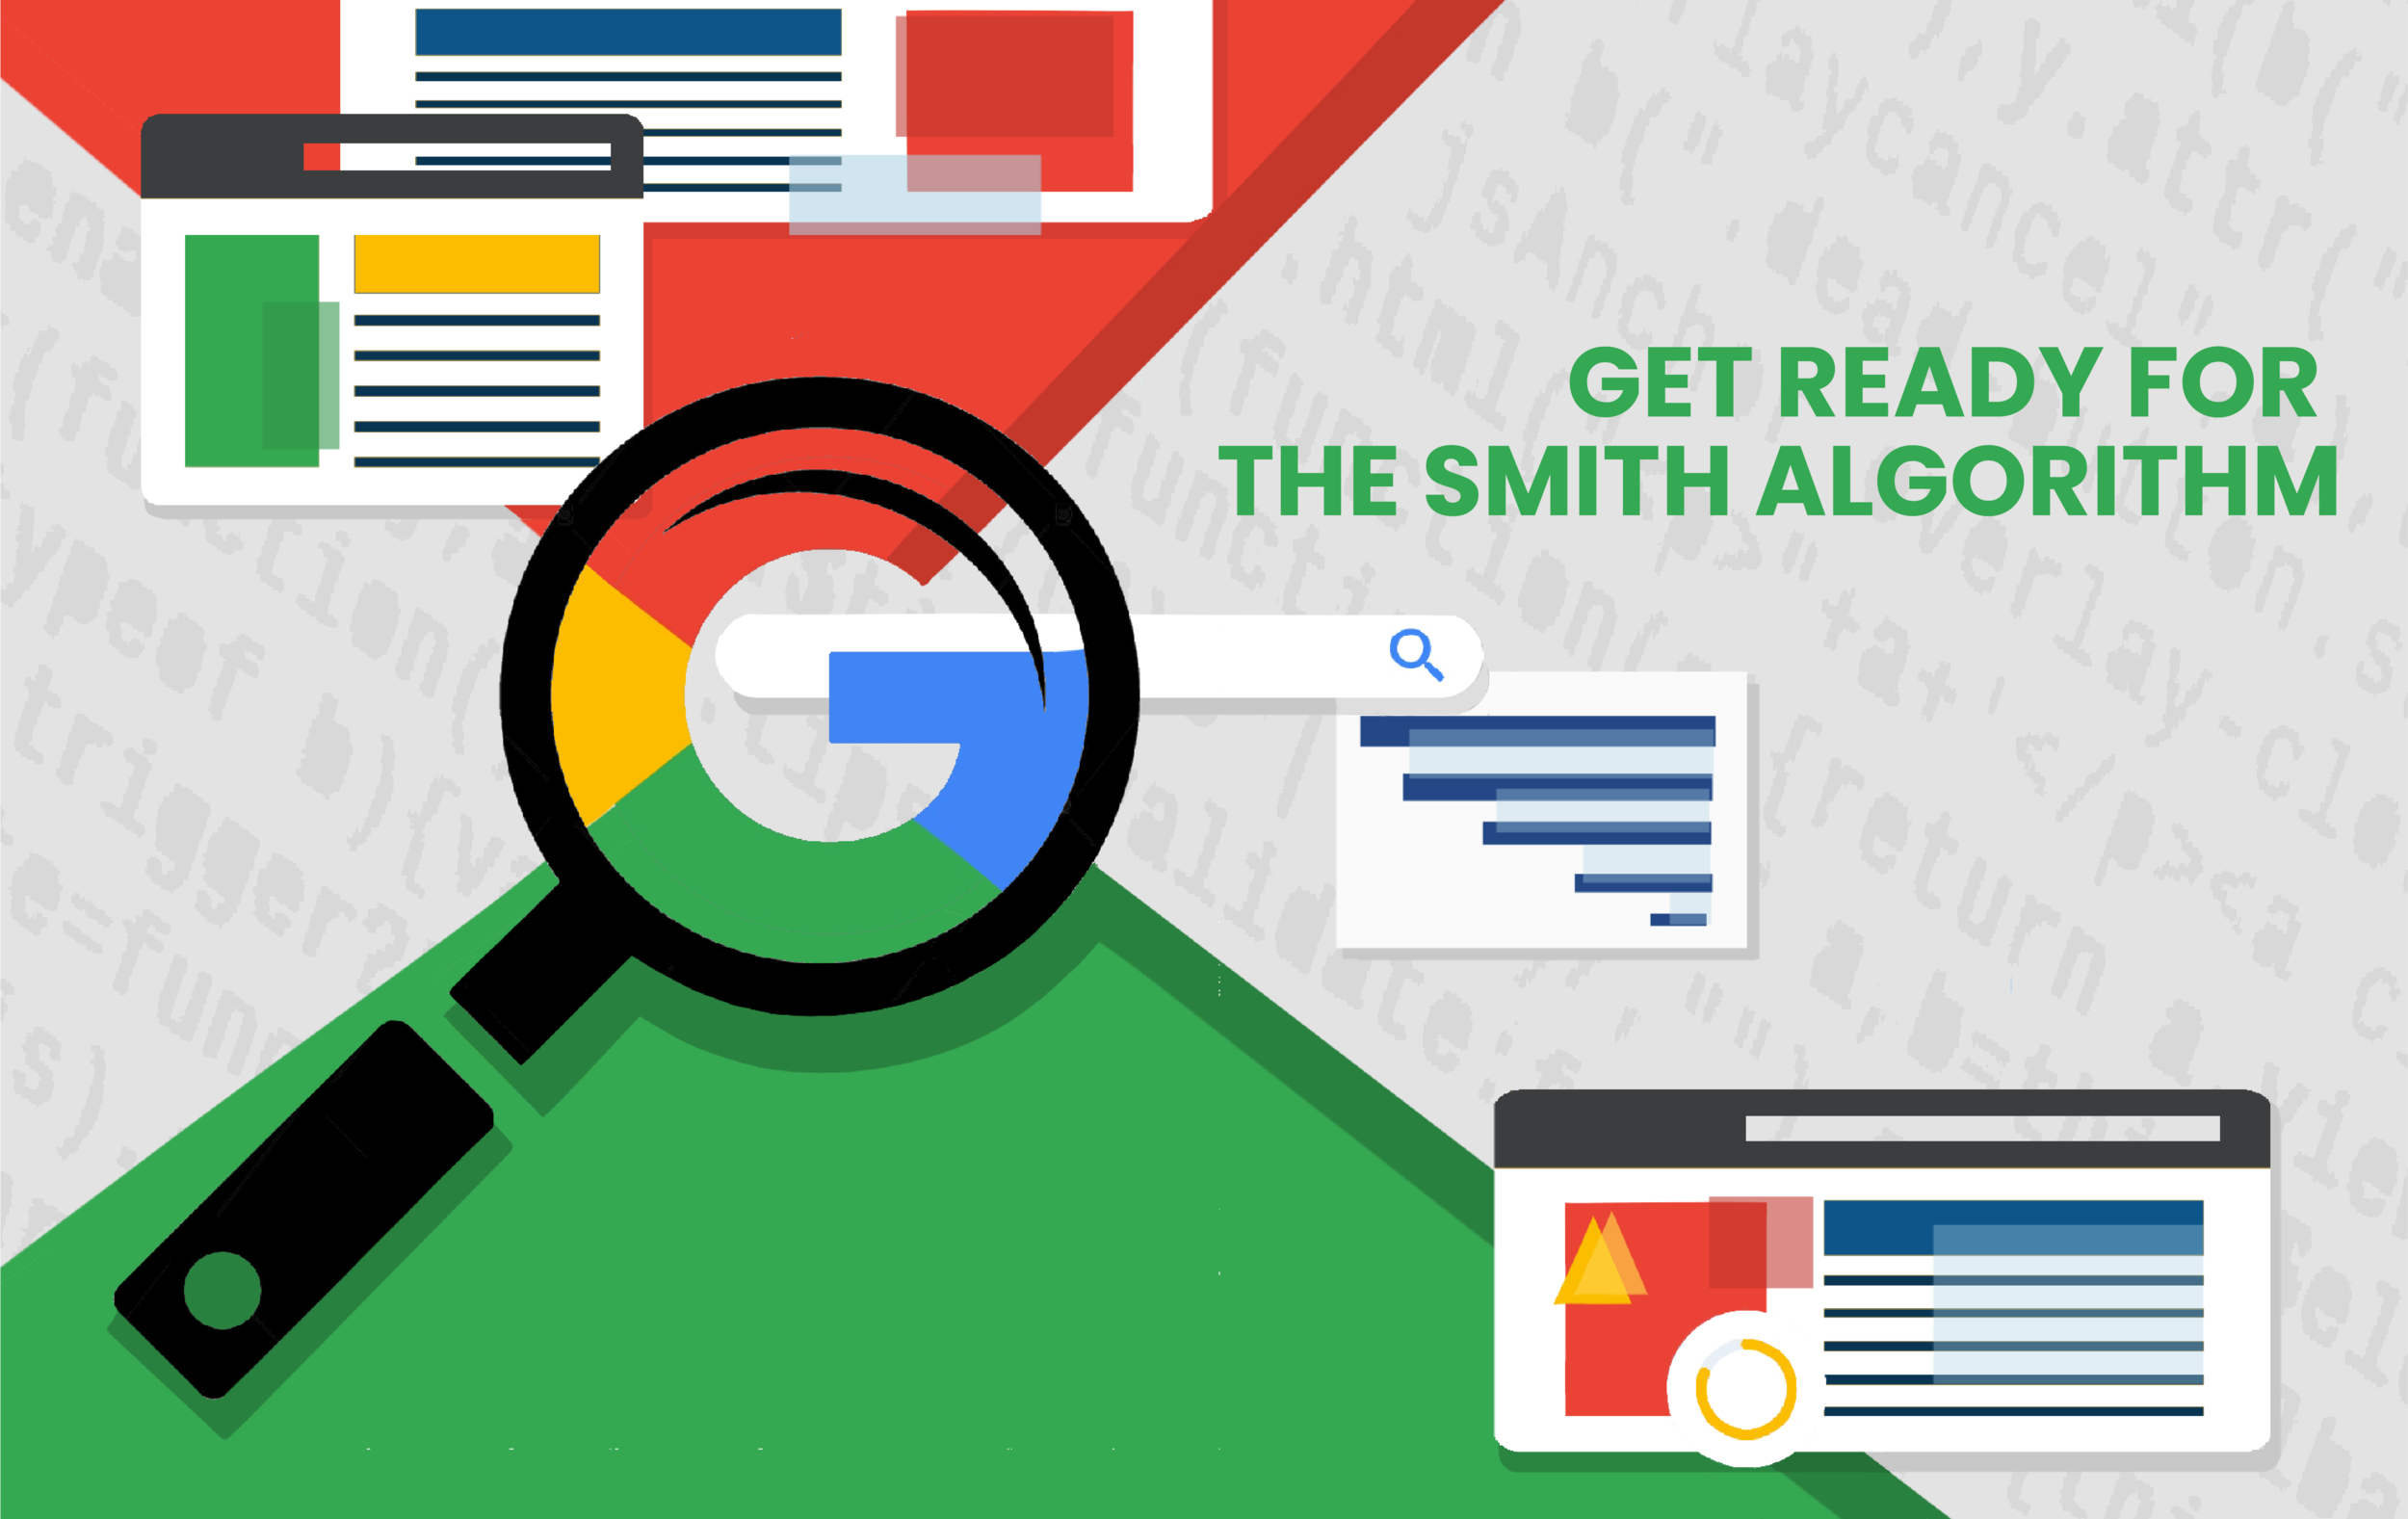 How You Should Prepare for Google’s Expected Update: The SMITH Algorithm